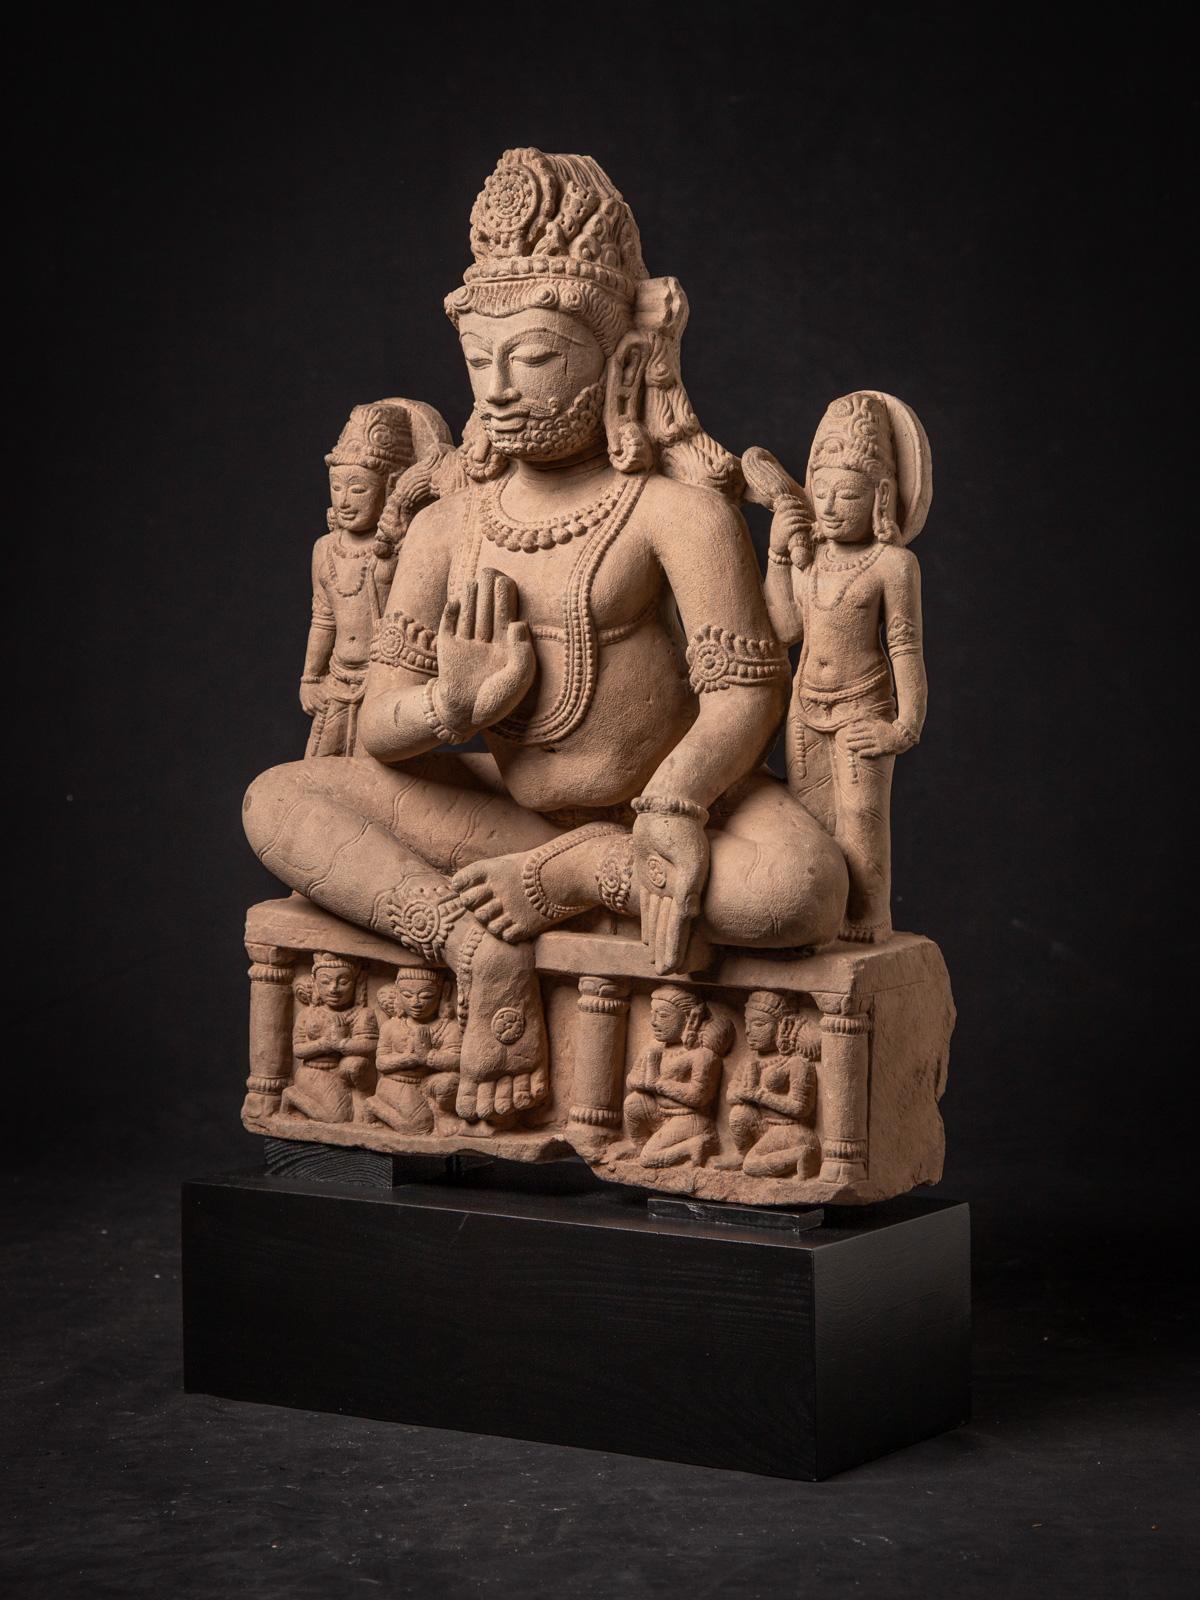 This sandstone sculpture, originating from Madhya Pradesh in India during the 19th century, is a striking piece of art. Carved from sandstone, it stands at an impressive height of 69 cm and features dimensions of 41.5 cm in width and 16.5 cm in